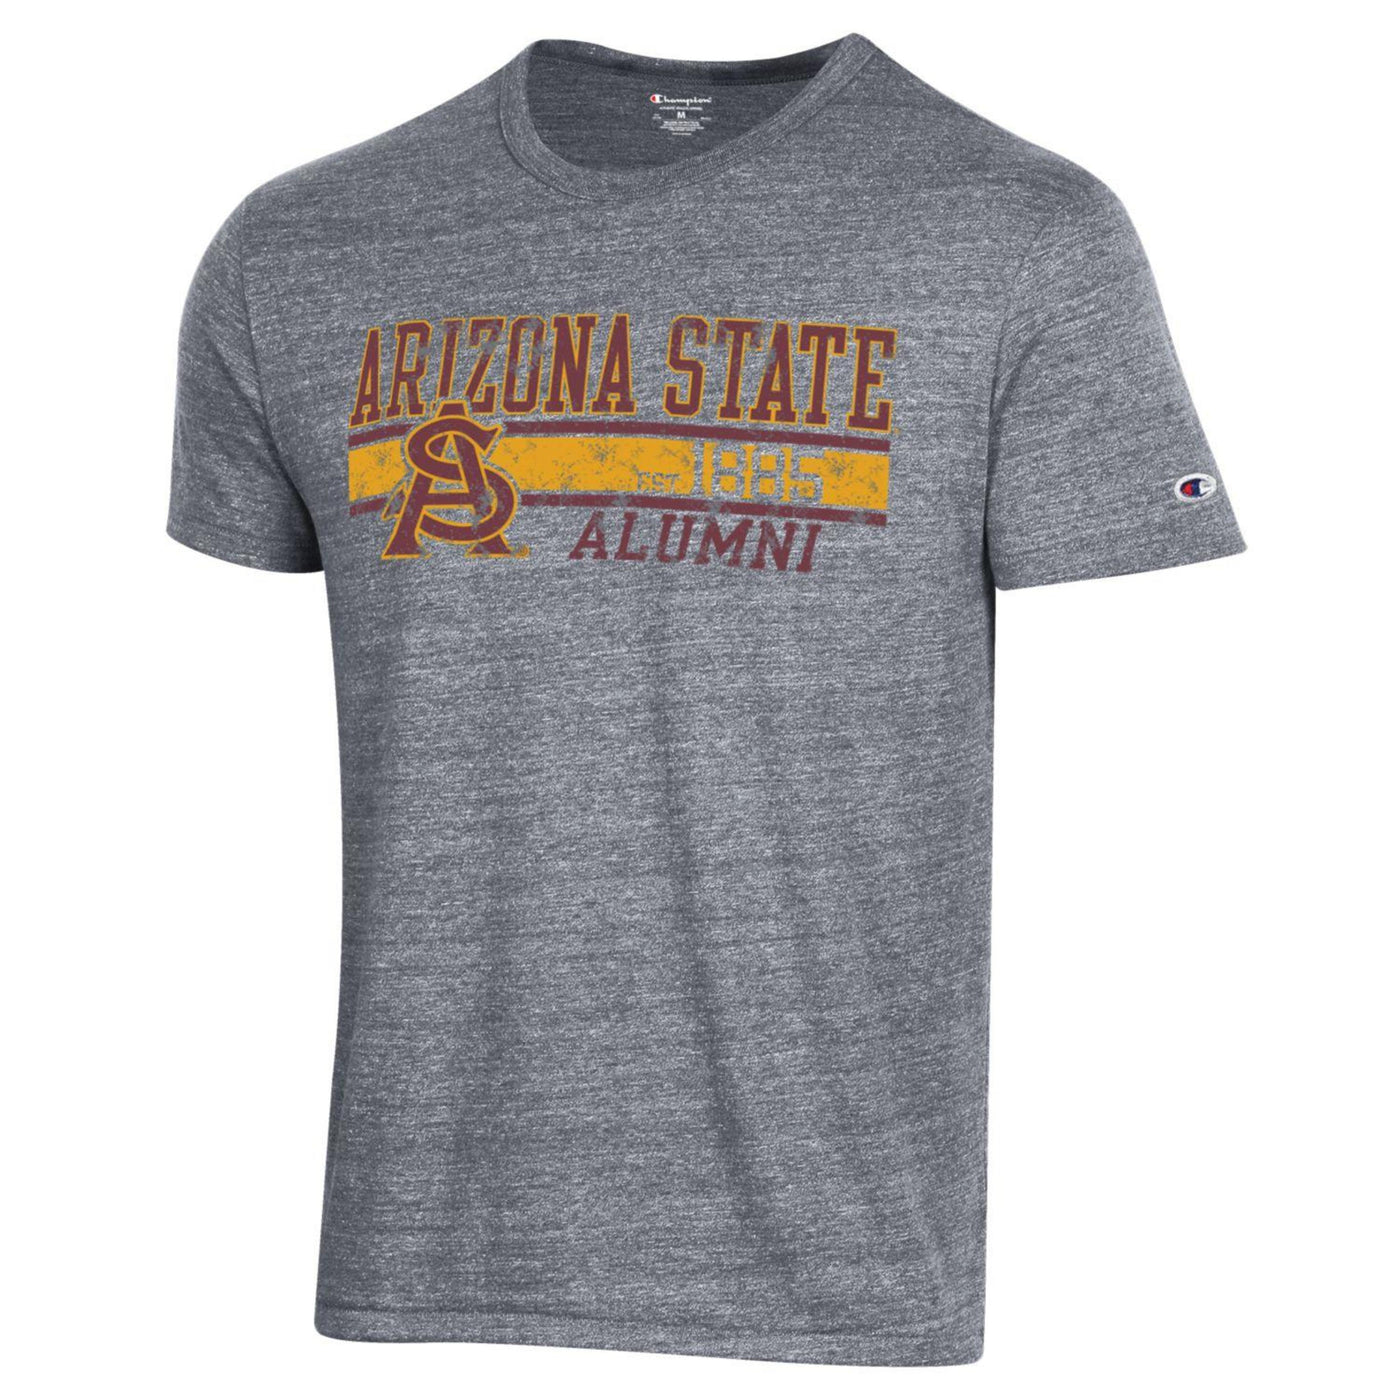 ASu gray tri-blend tee with 'Arizona State Alumni Tee' with and interlocking 'A' and 'S' next to 1885